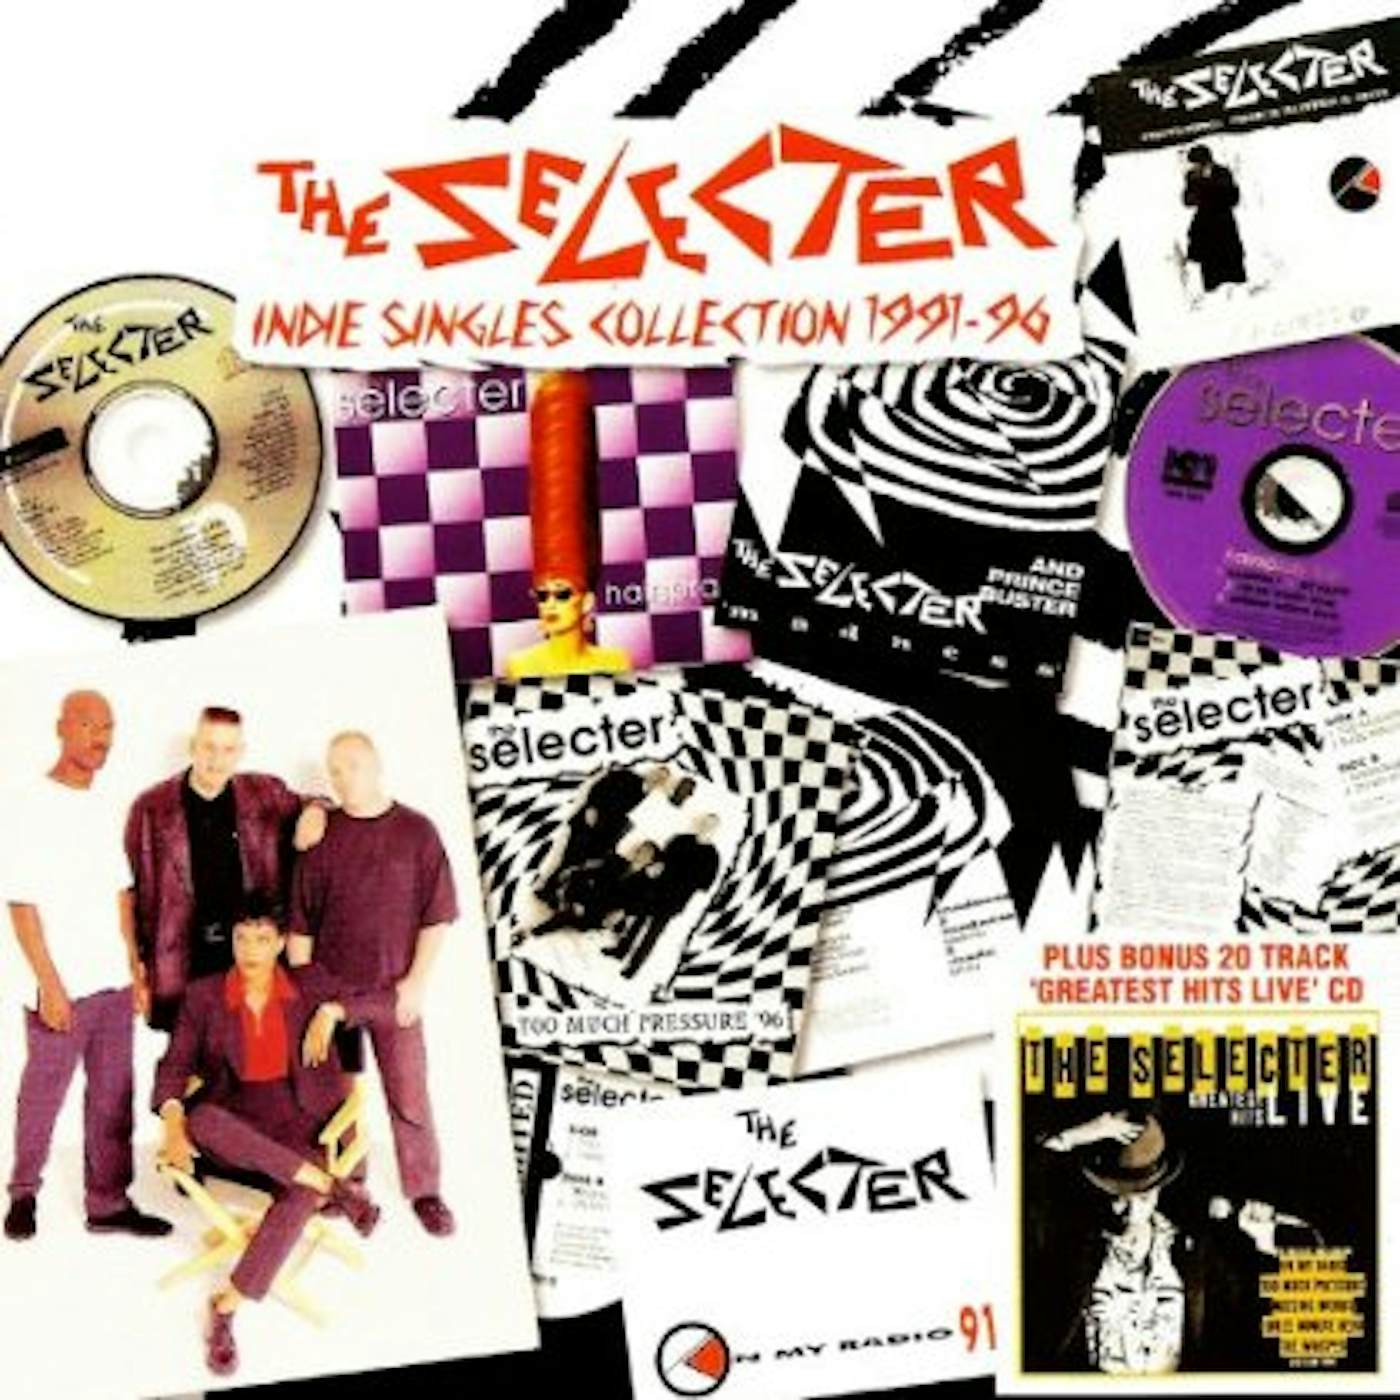 Selecter INDIE SINGLES COLLECTION 1991-96 CD